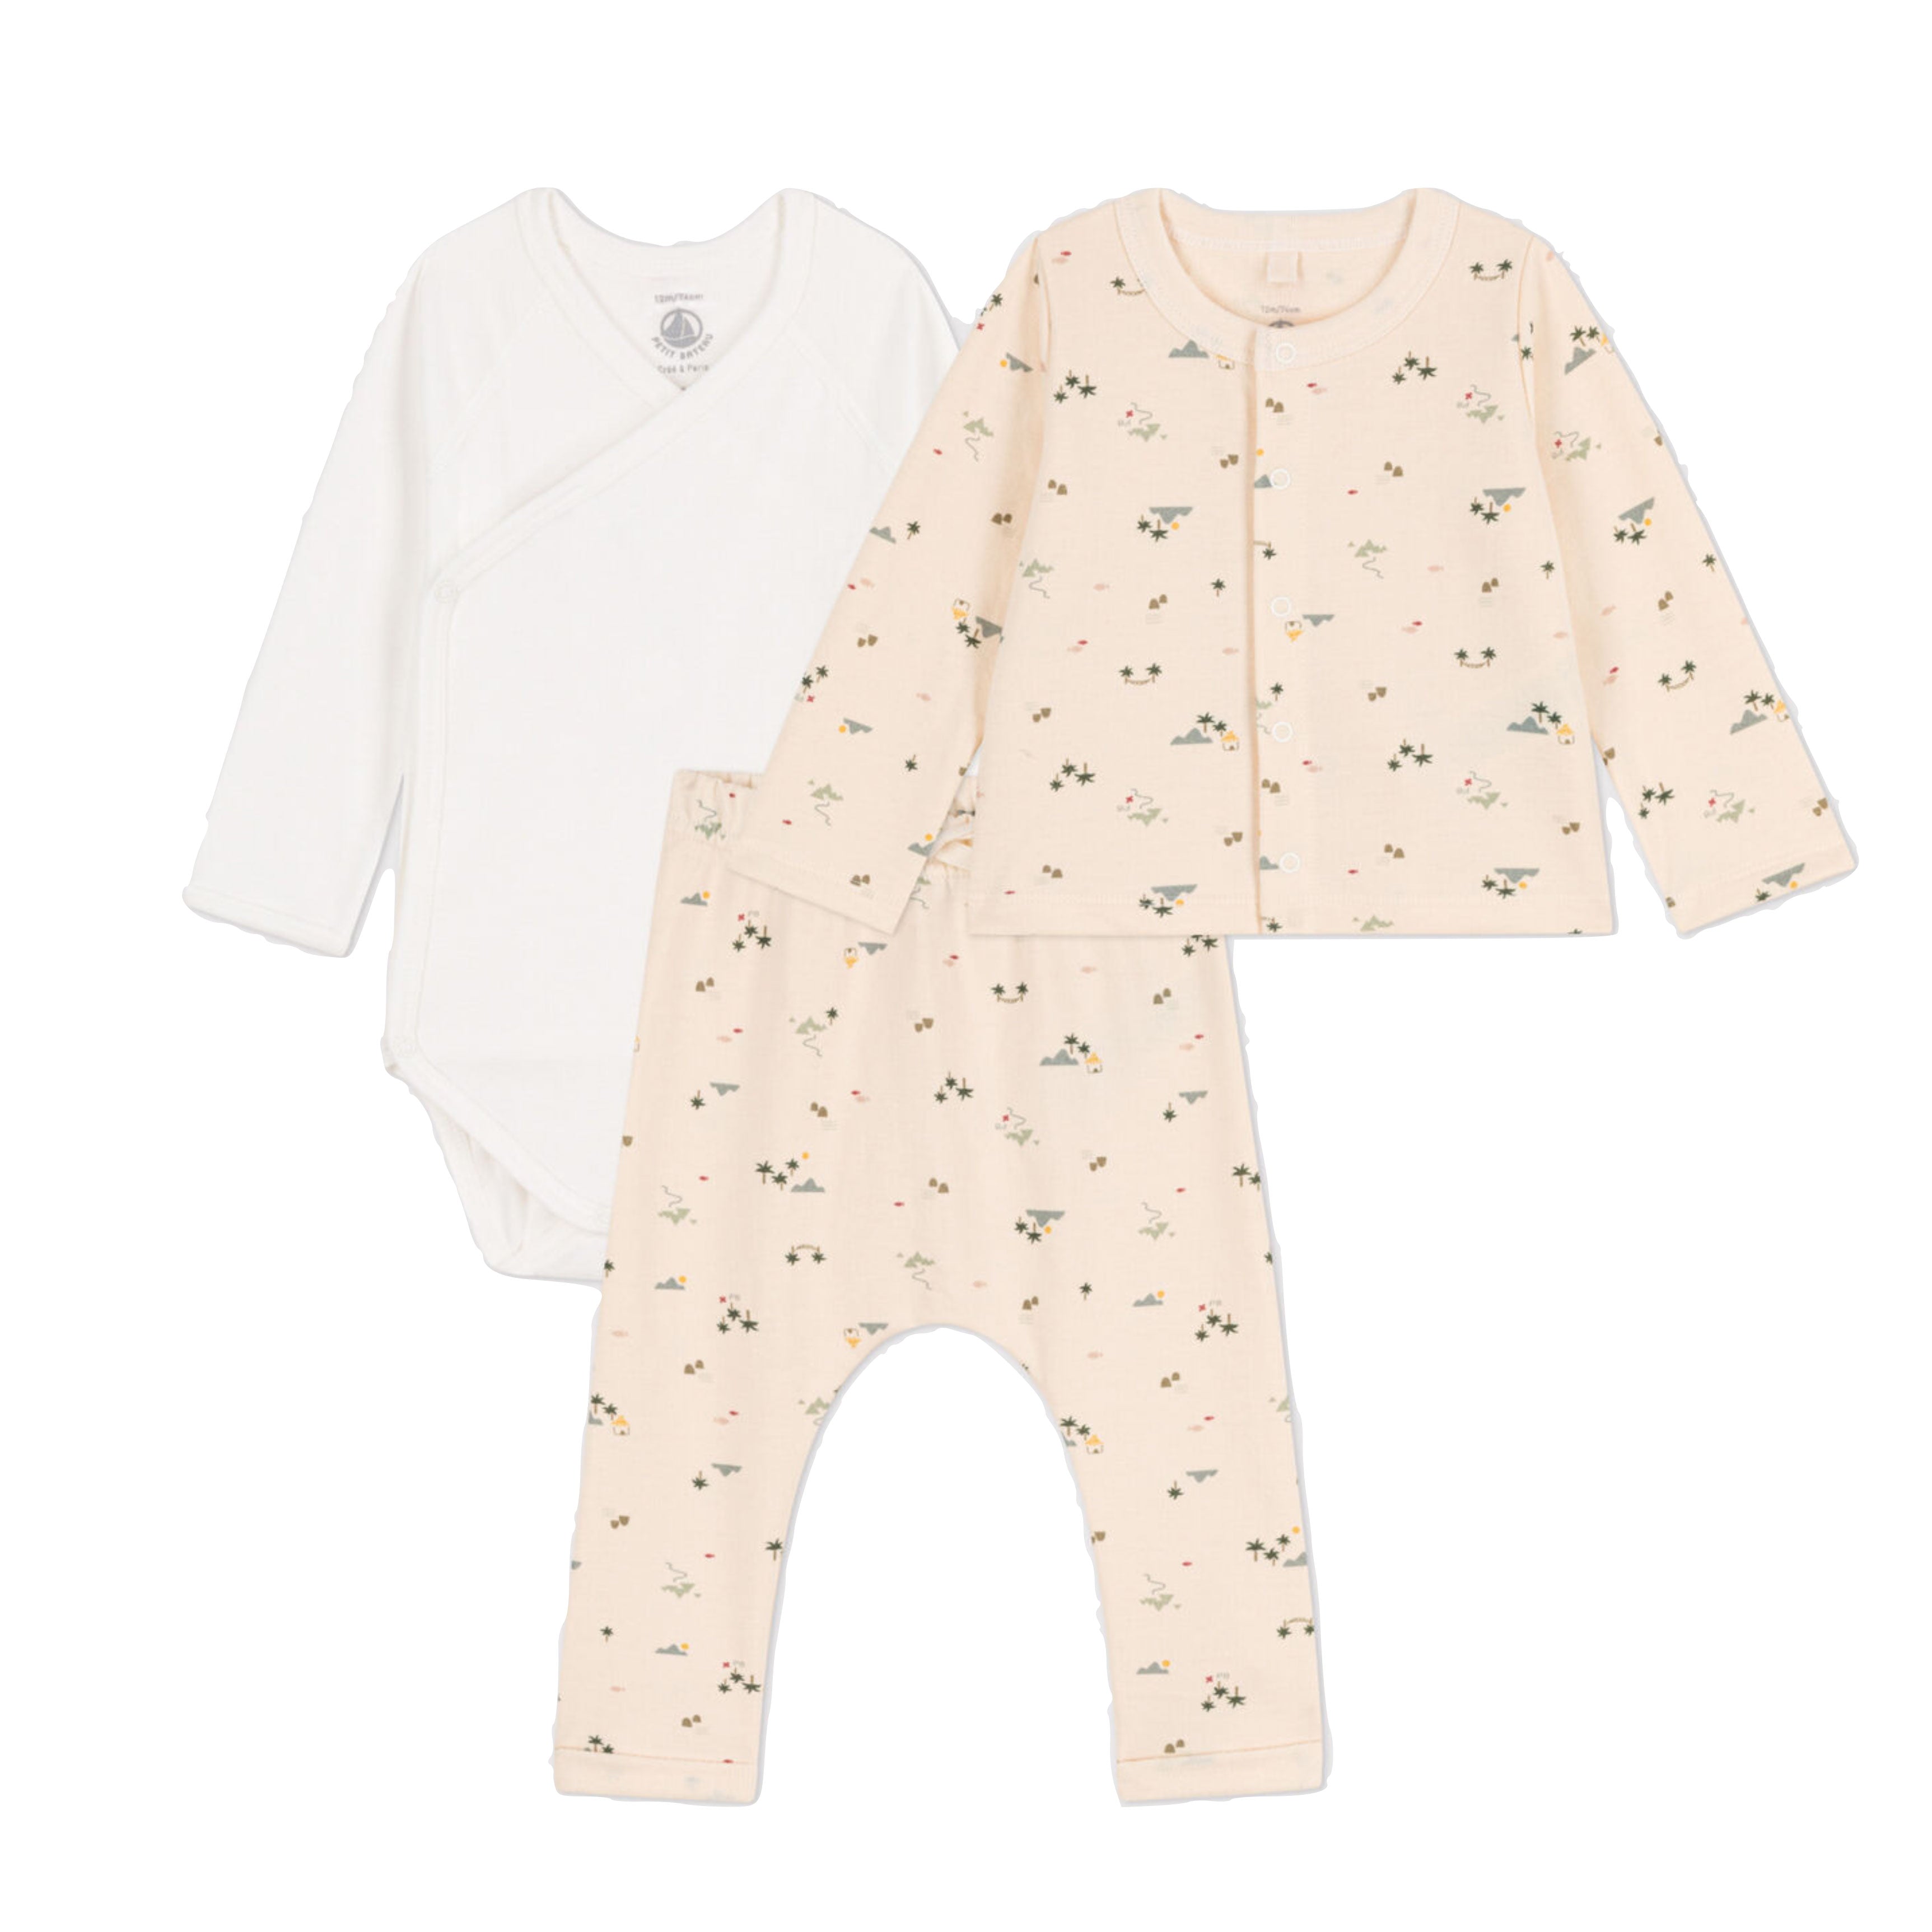 Luxury 3 Piece Organic Cotton Baby Gift At Bonjour Baby Baskets